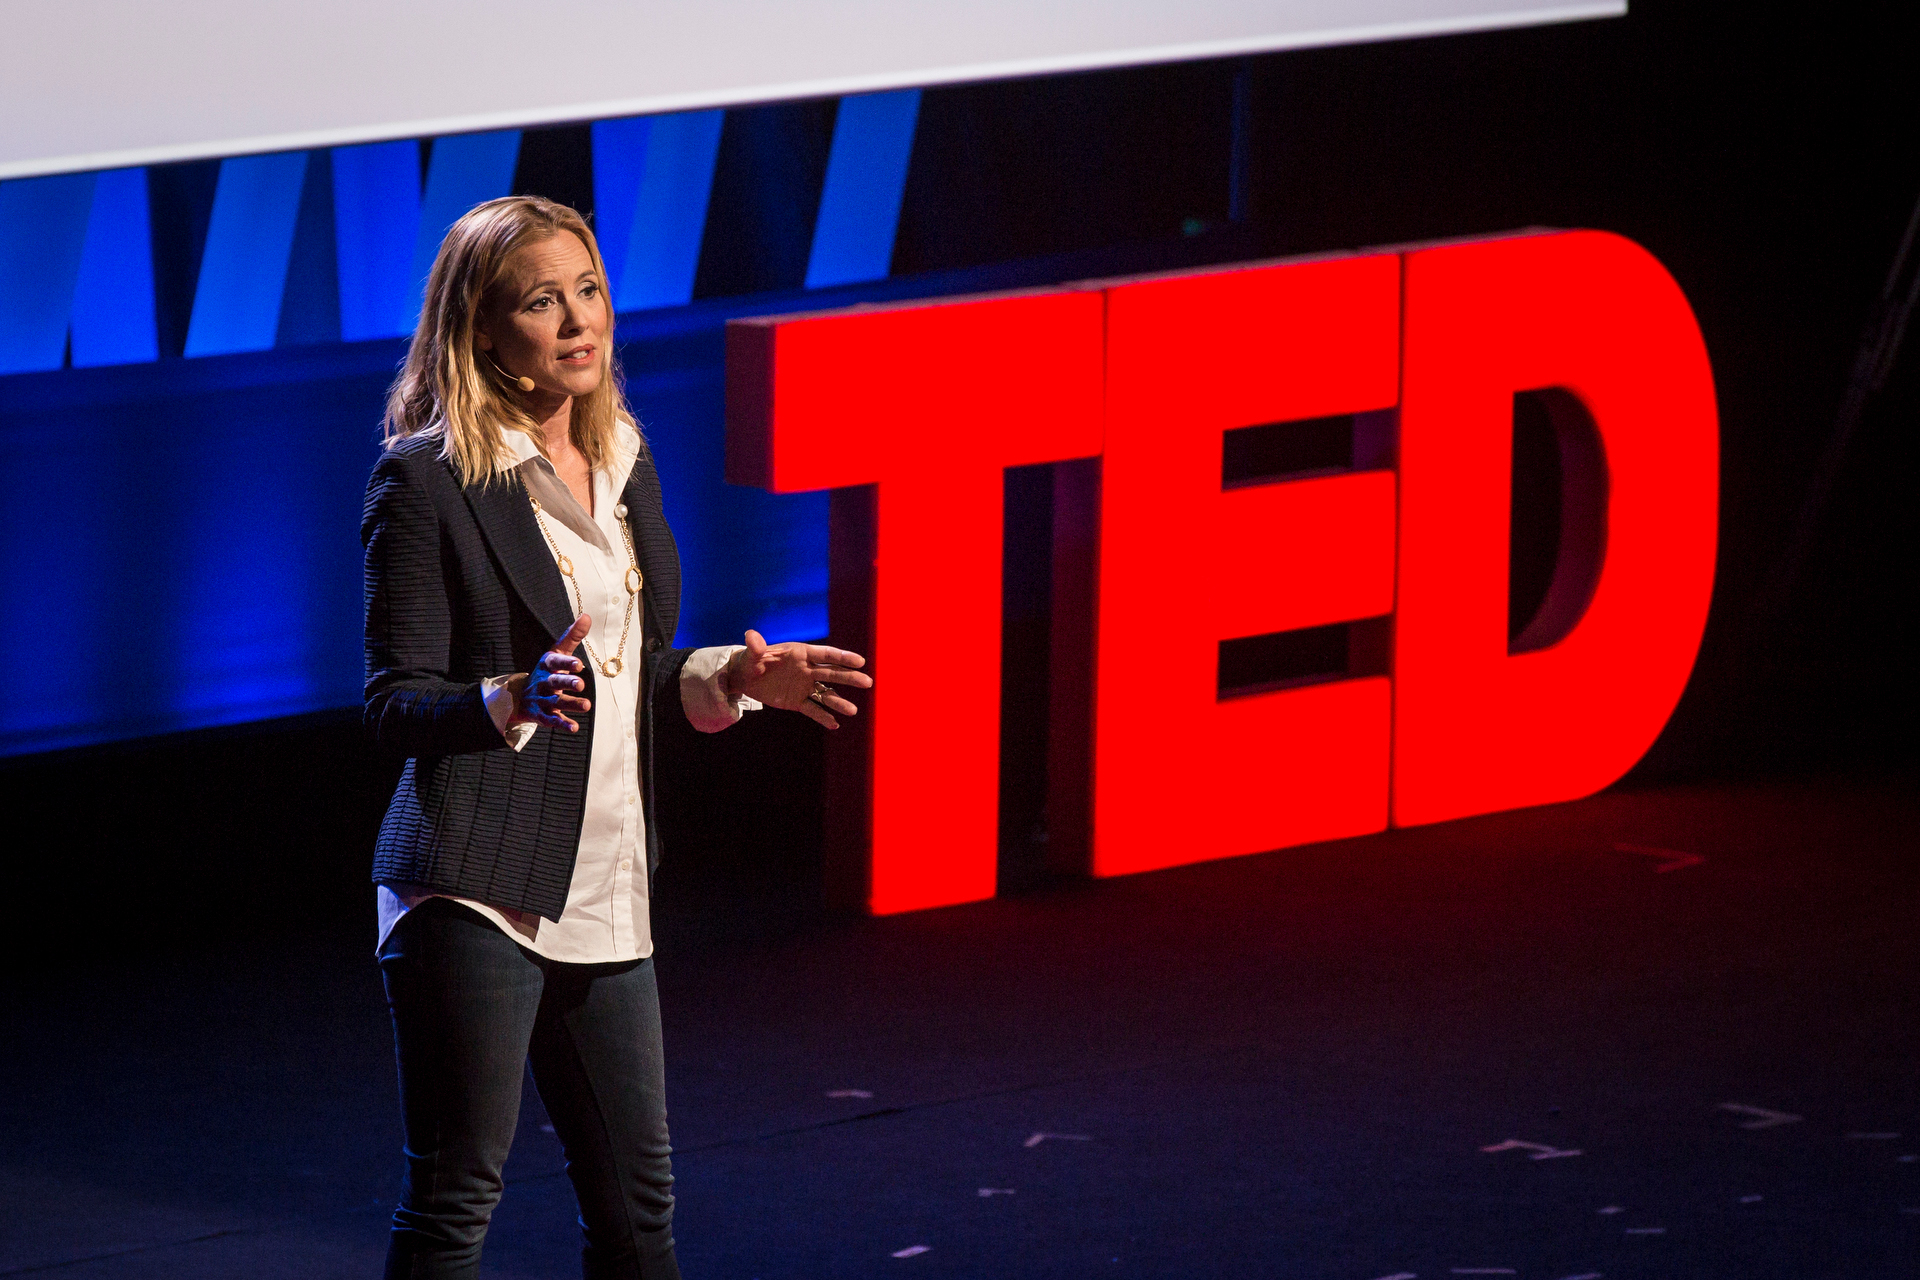 Maria Bello speaks at TEDWomen2015 - Momentum, Session 3, May 28, 2015, Monterey Conference Center, Monterey, California, USA. Photo: Marla Aufmuth/TED